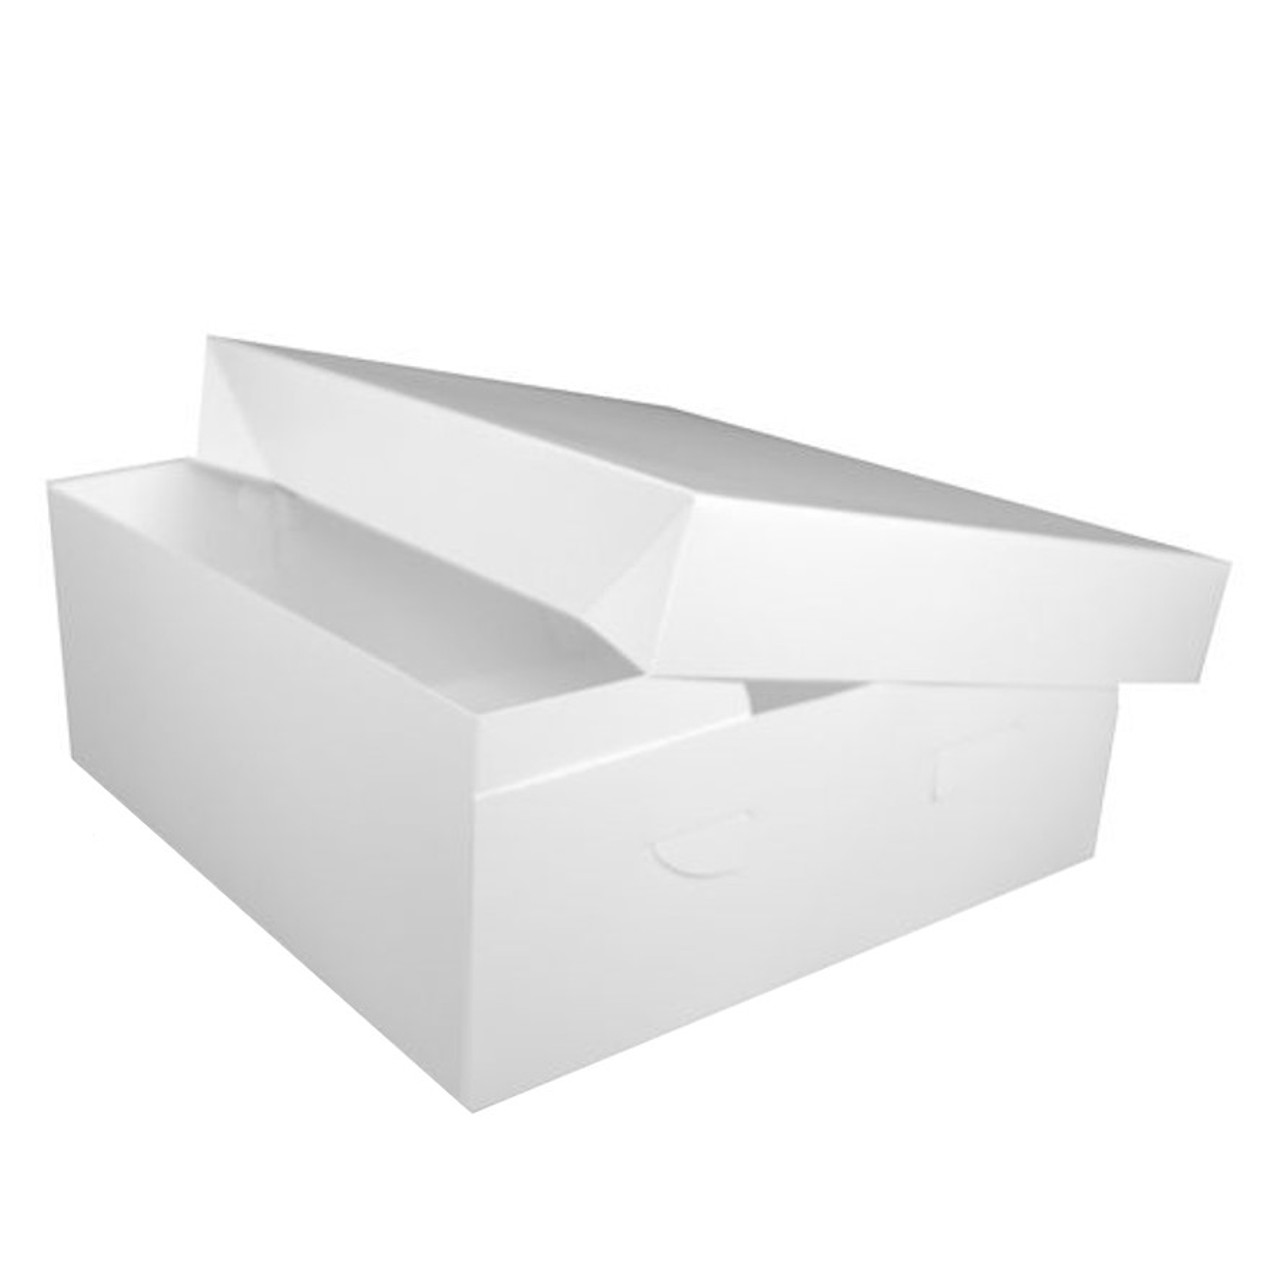 2 Piece quality white Cake  Box 12”x 12” x 6”  300 x 300 x 150mm  ( Pack of 5 or 25 )